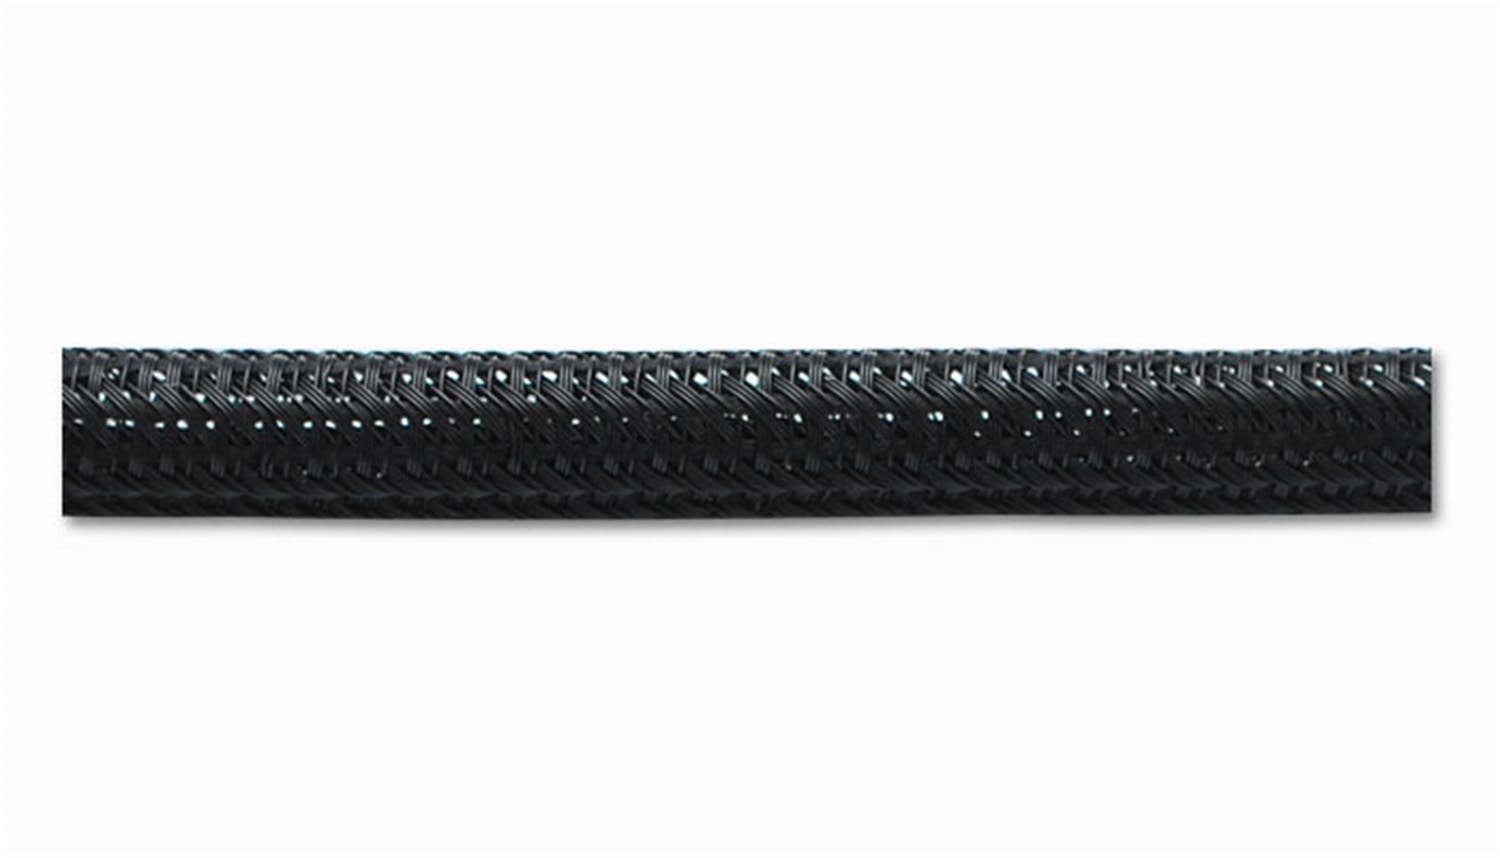 Vibrant Performance 25806 Flexible Split Sleeving, Size: 1-1/2 inch (5 foot length) - Black only